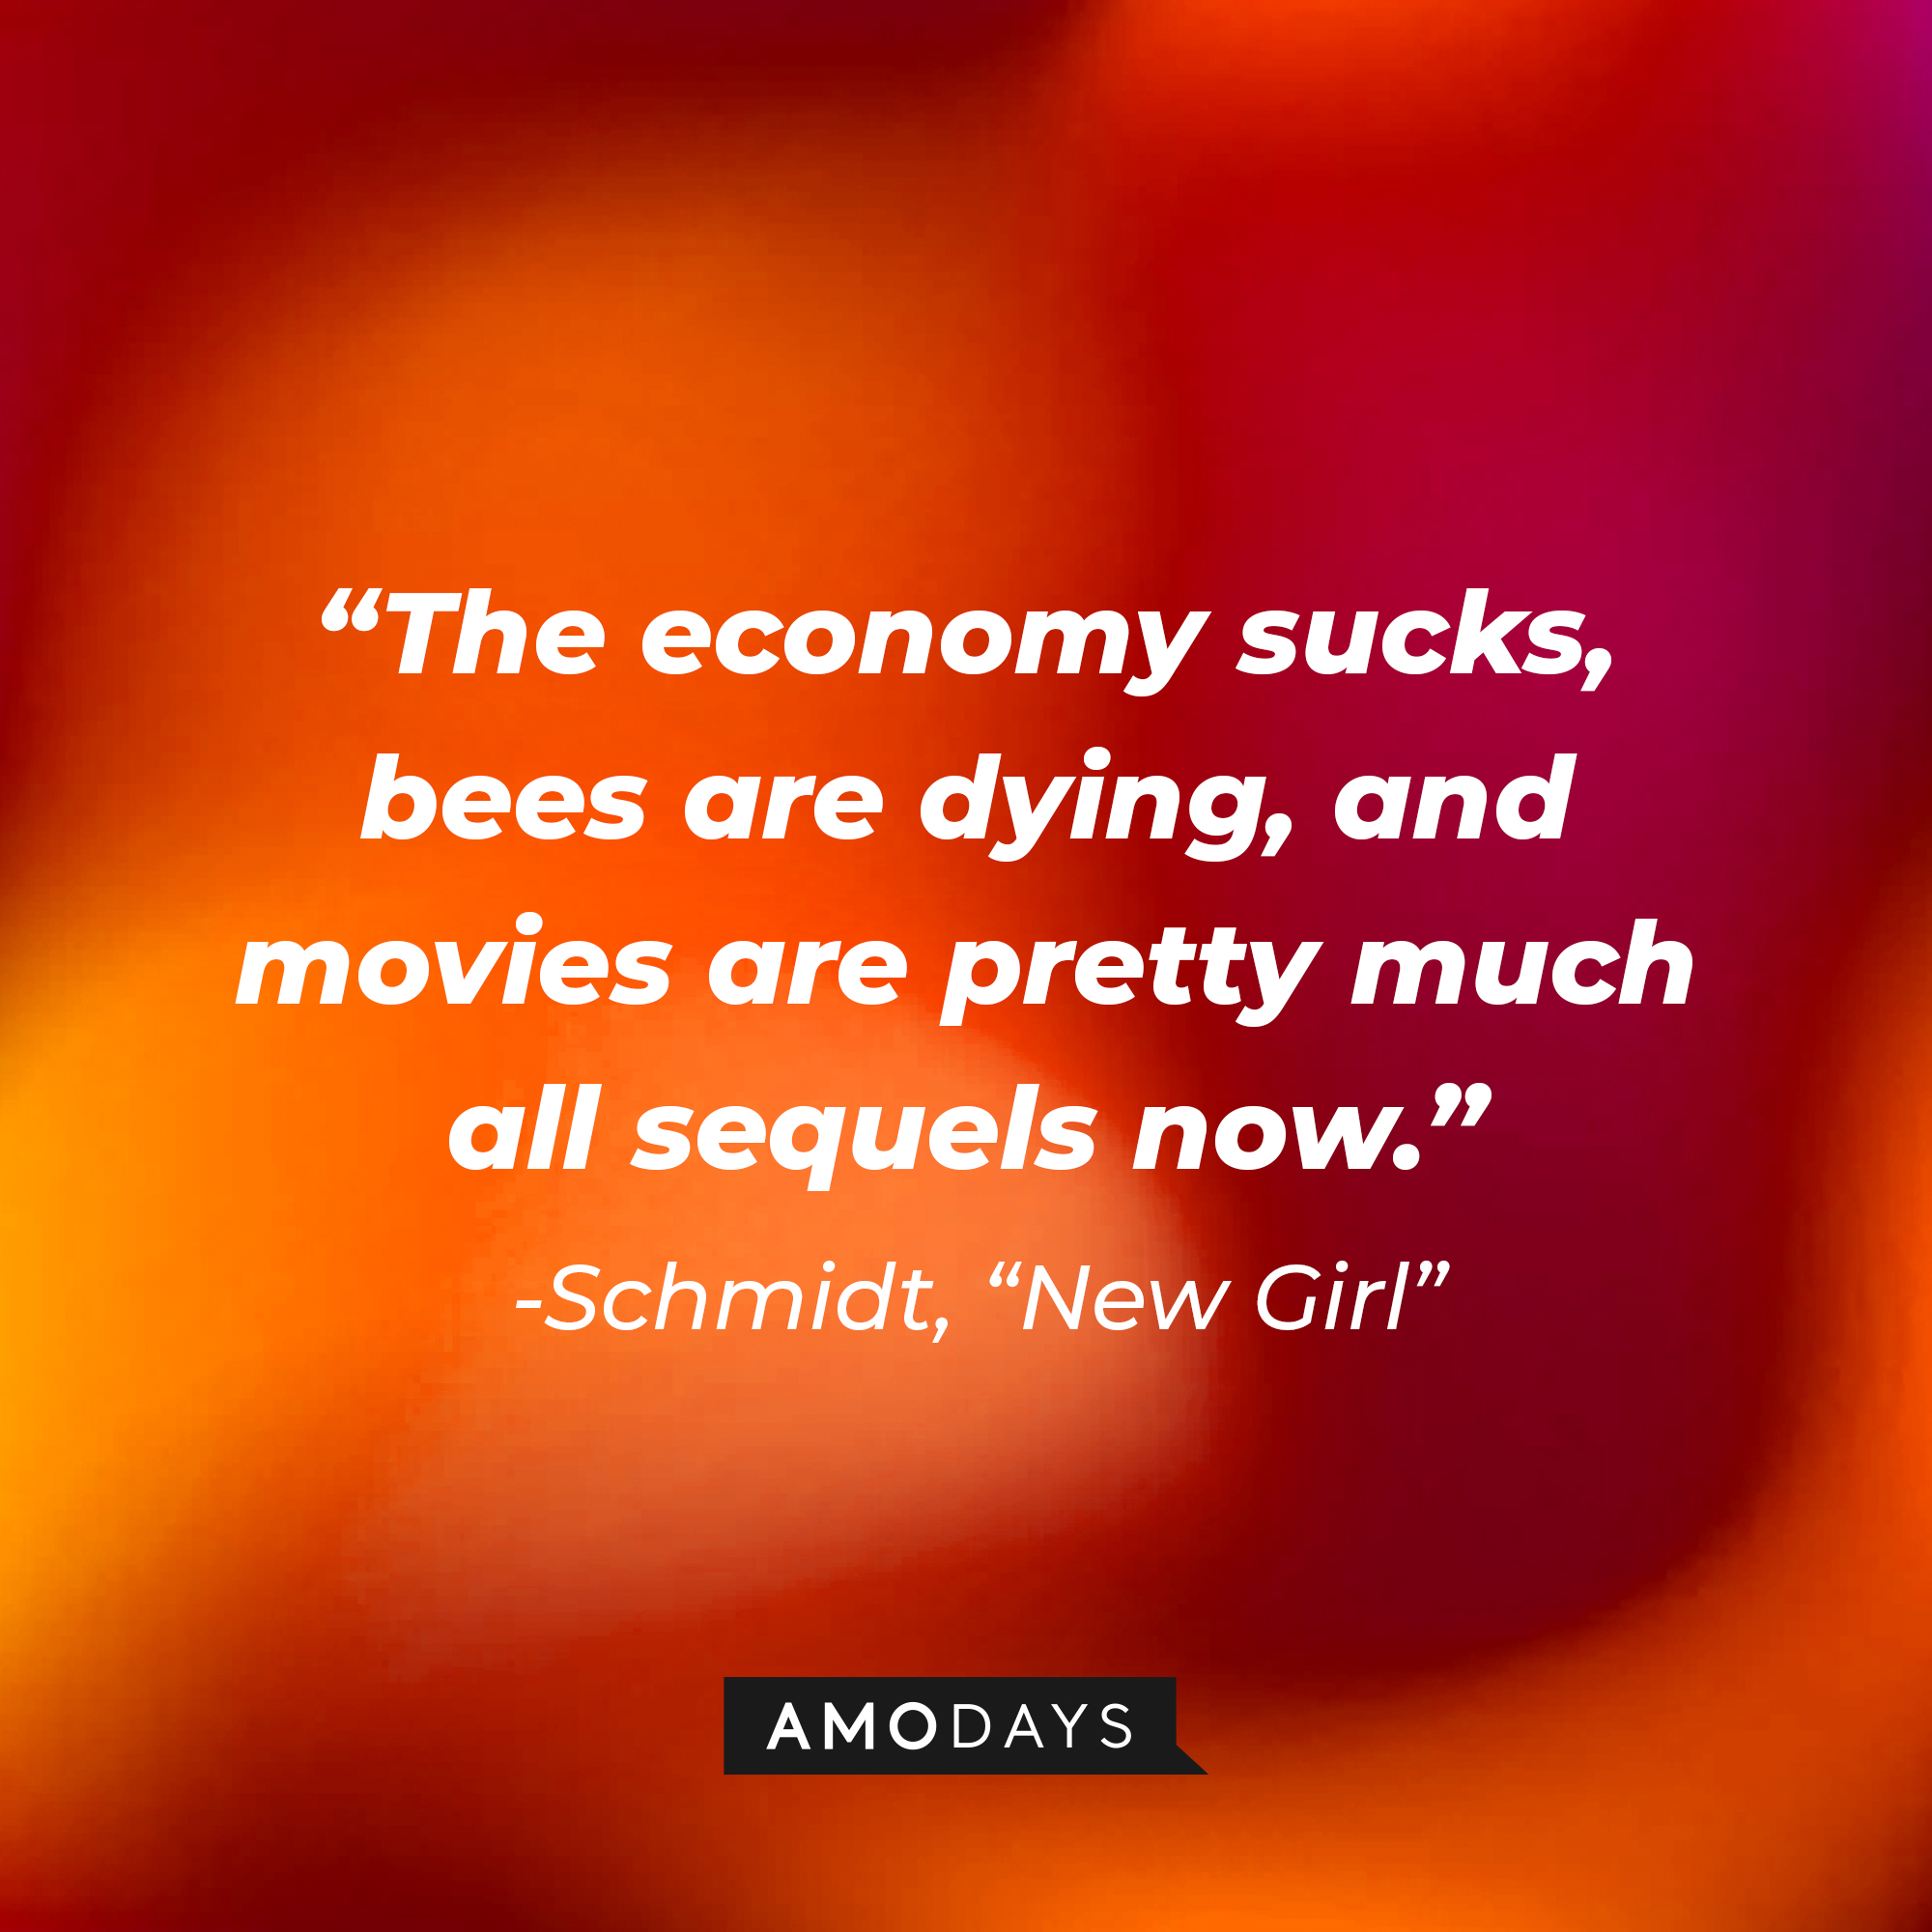 Schmidt's quote: "The economy sucks, bees are dying, and movies are pretty much all sequels now." | Source: Amodays